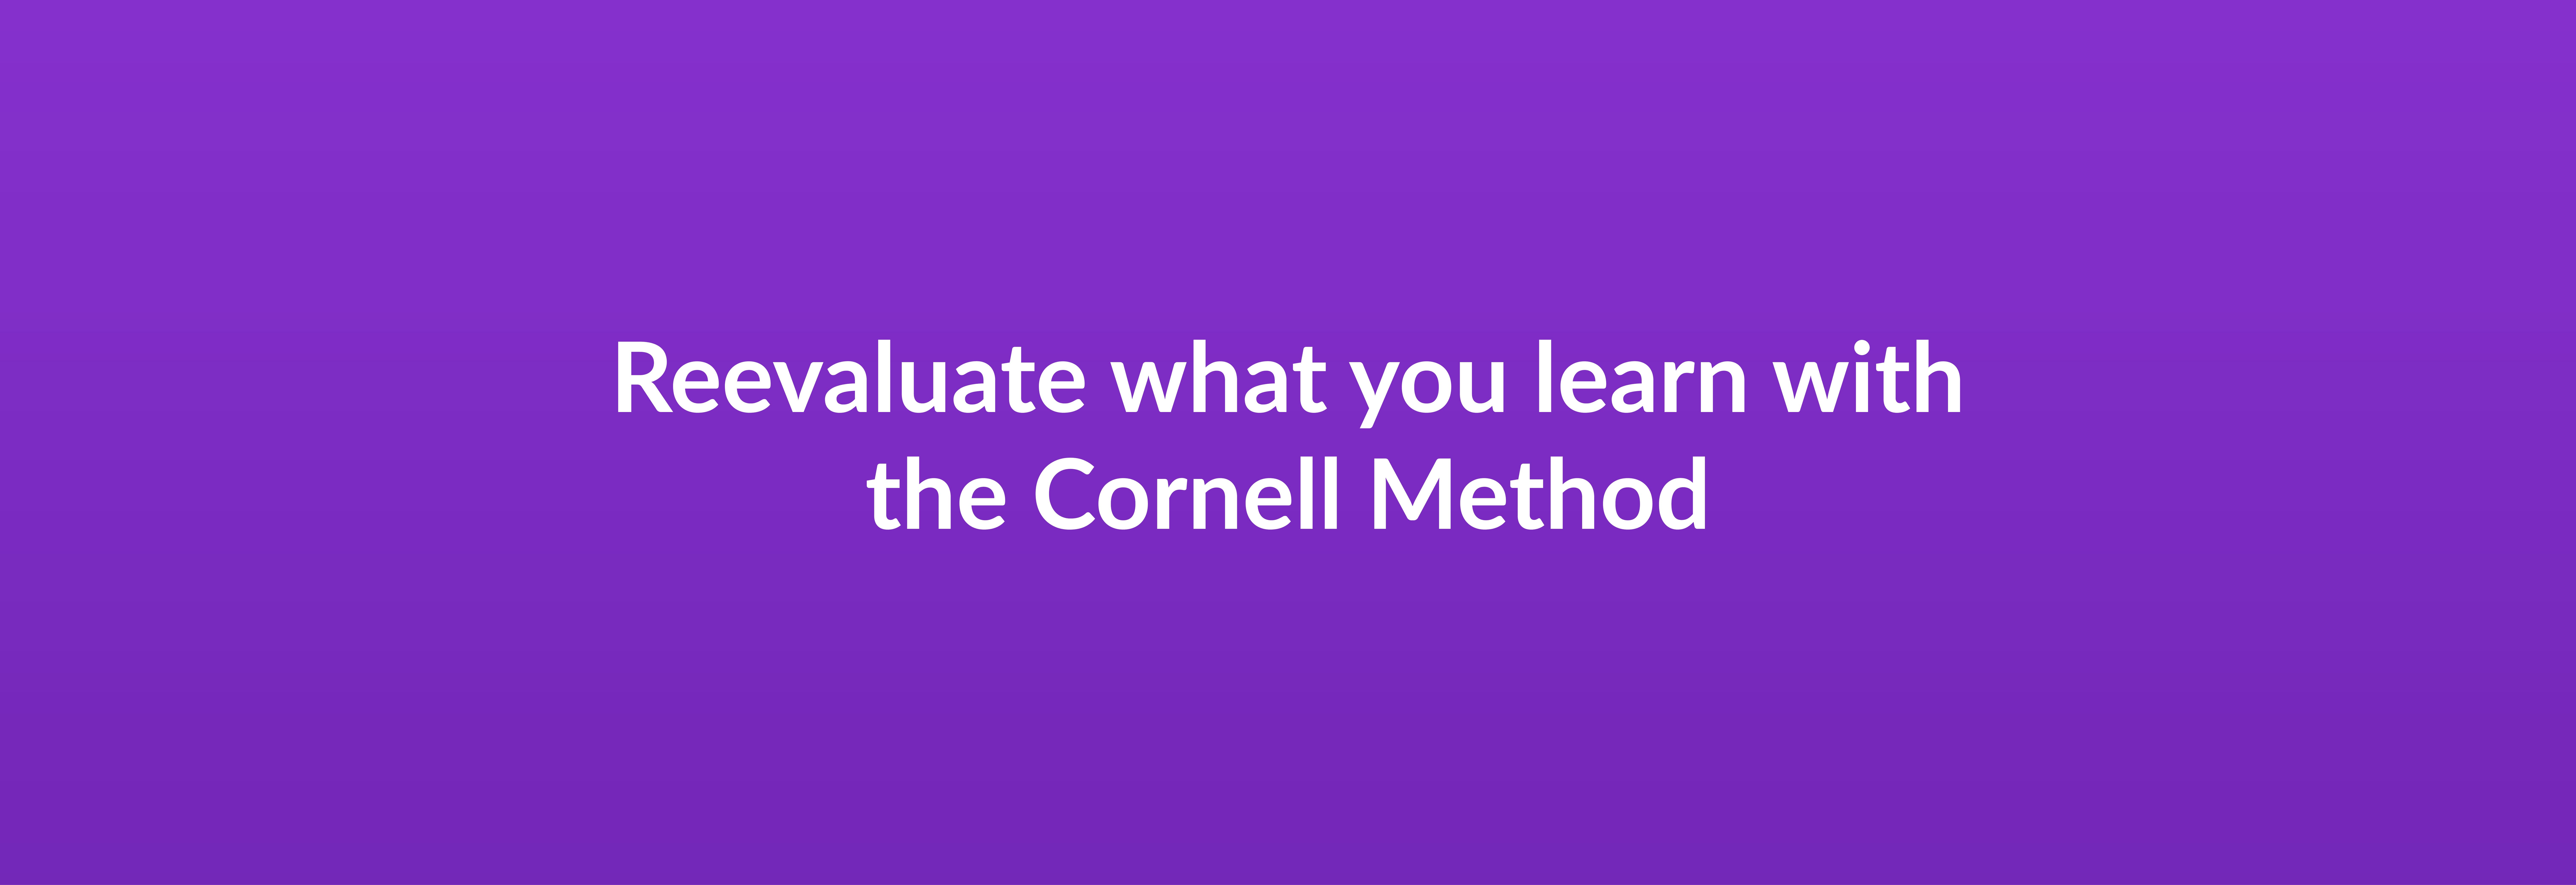 Reevaluate what you learn with the Cornell Method